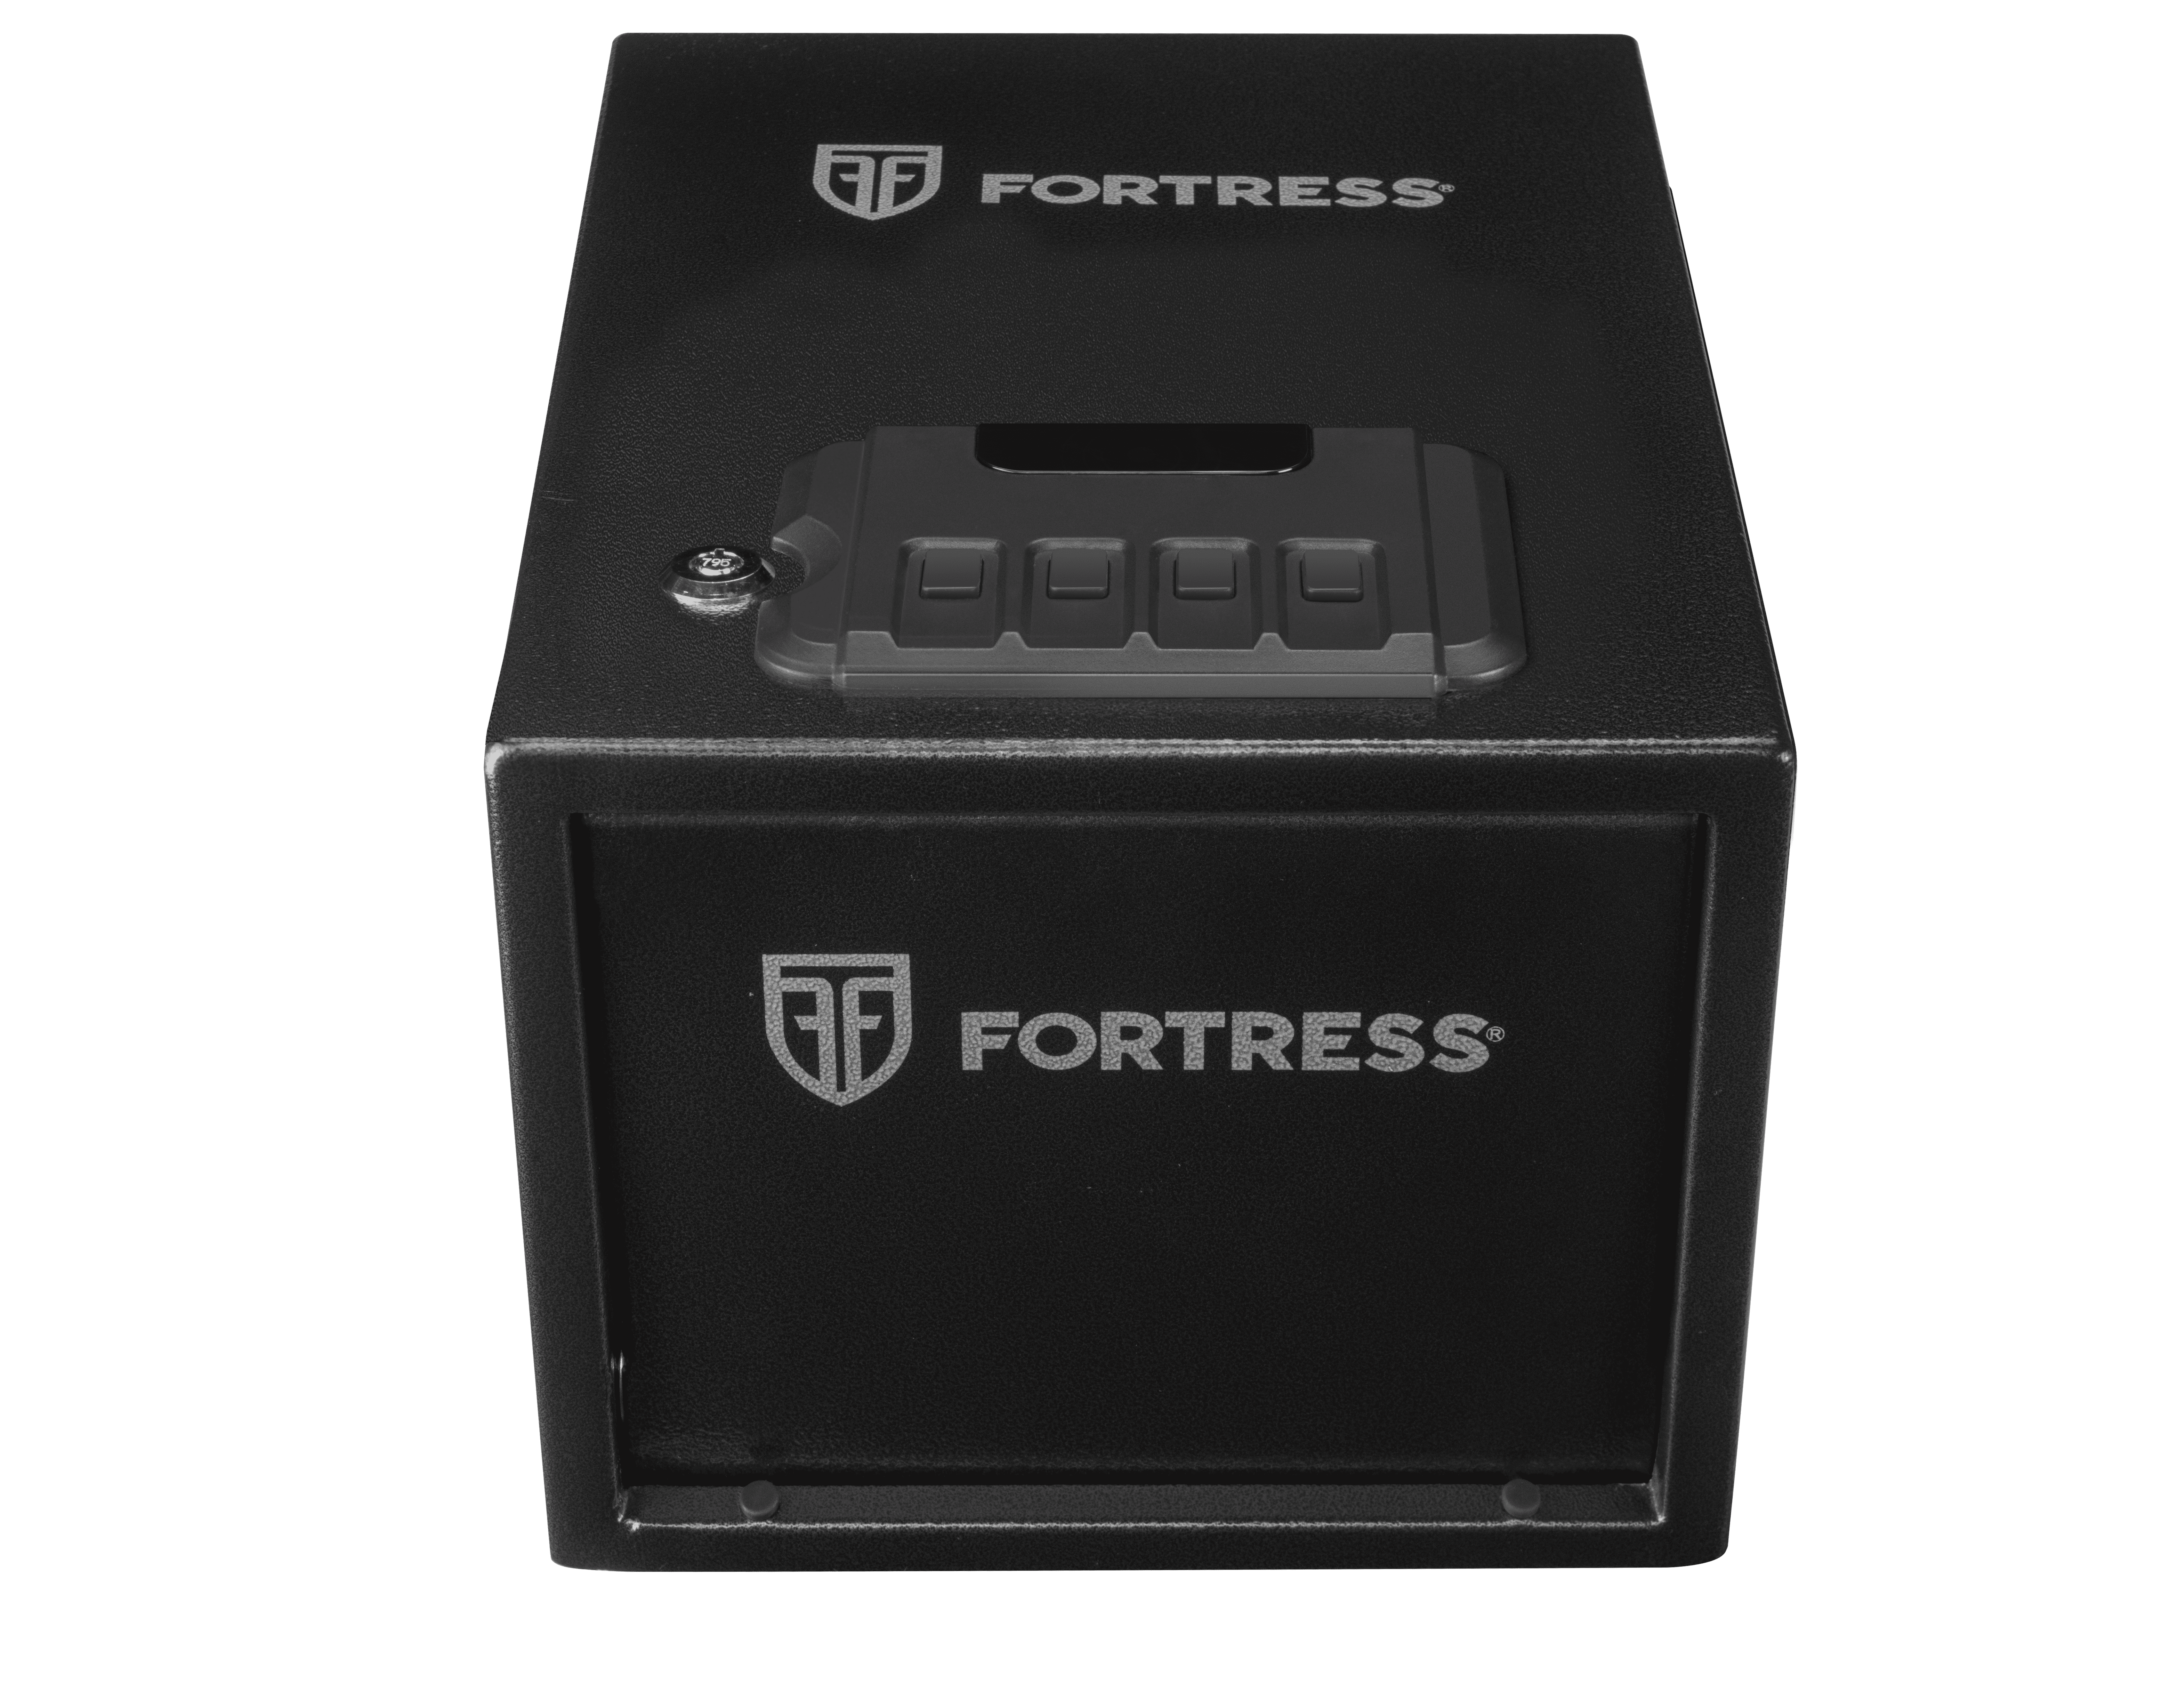 NEW FORTRESS PISTOL SECURITY SAFE VALUABLES GOLD SILVER CASH COINS FAST SHIP 